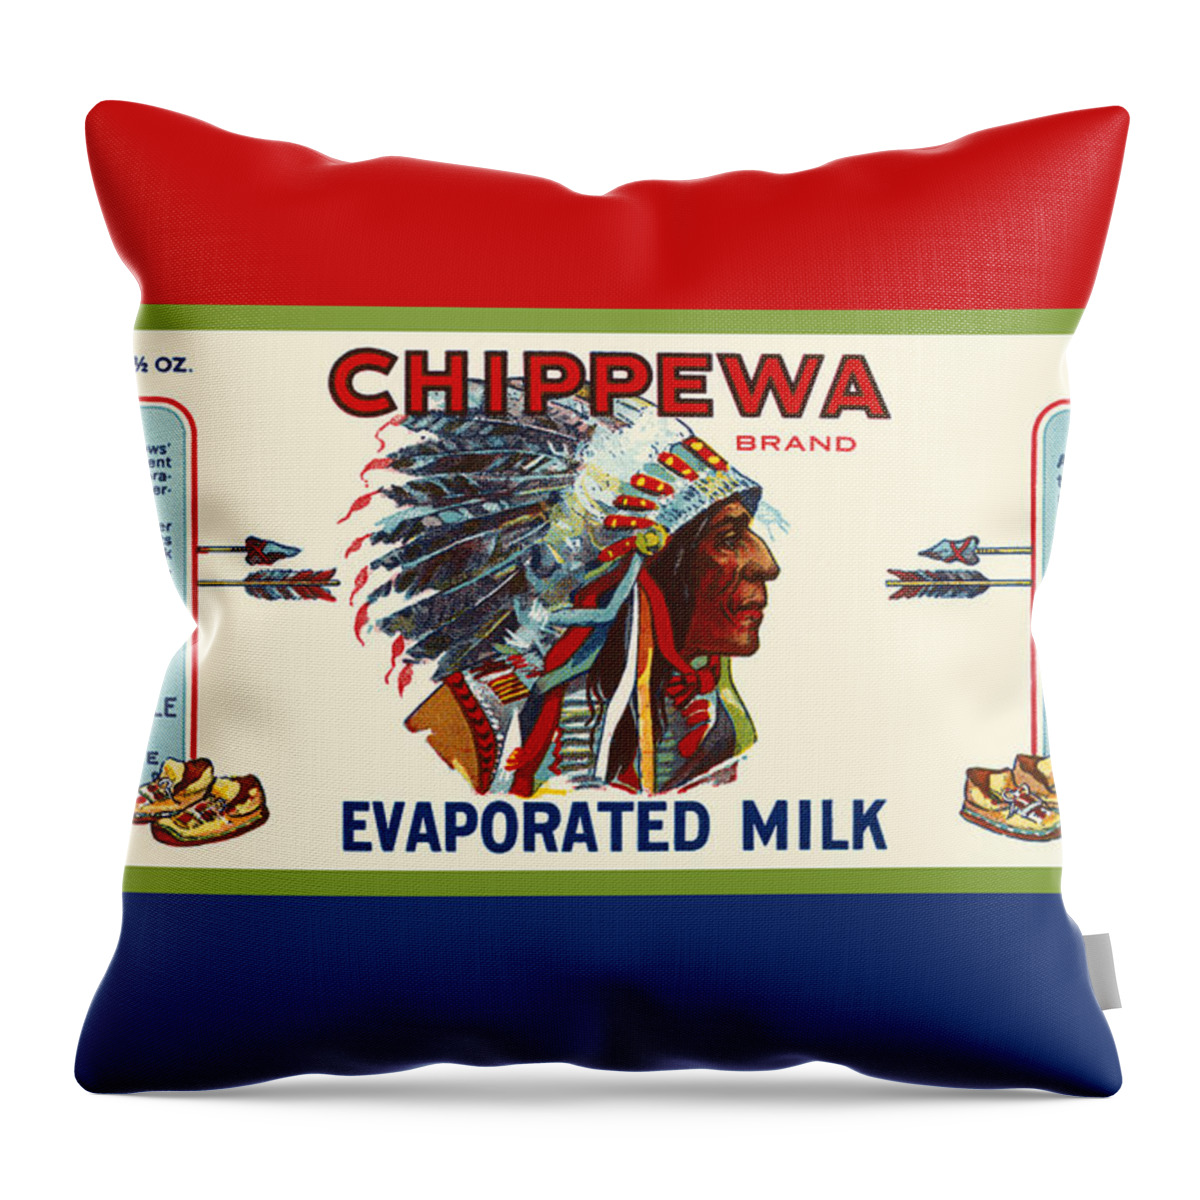 Can Throw Pillow featuring the painting Chippewa Brand Evaporated Milk by Unknown